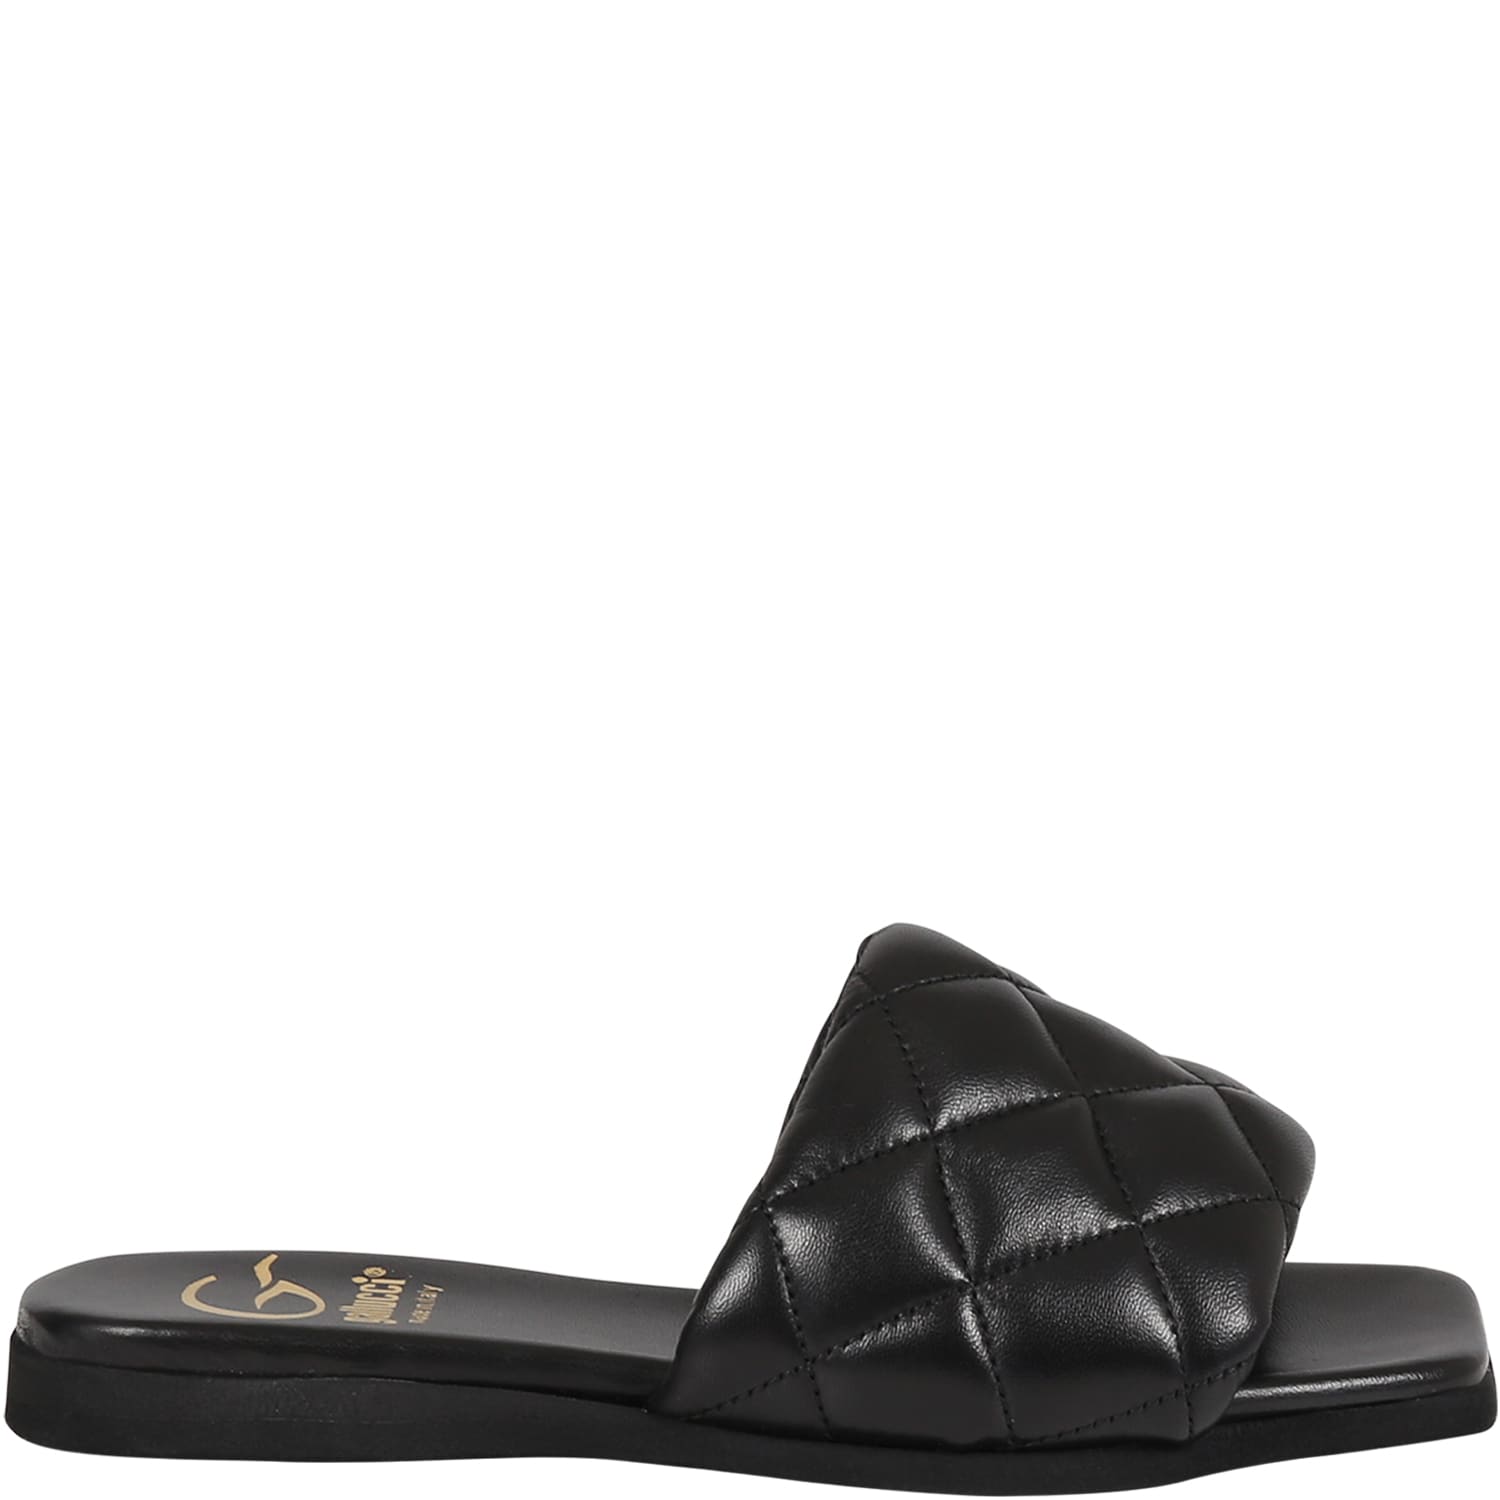 GALLUCCI BLACK SLIPPERS FOR GIRL